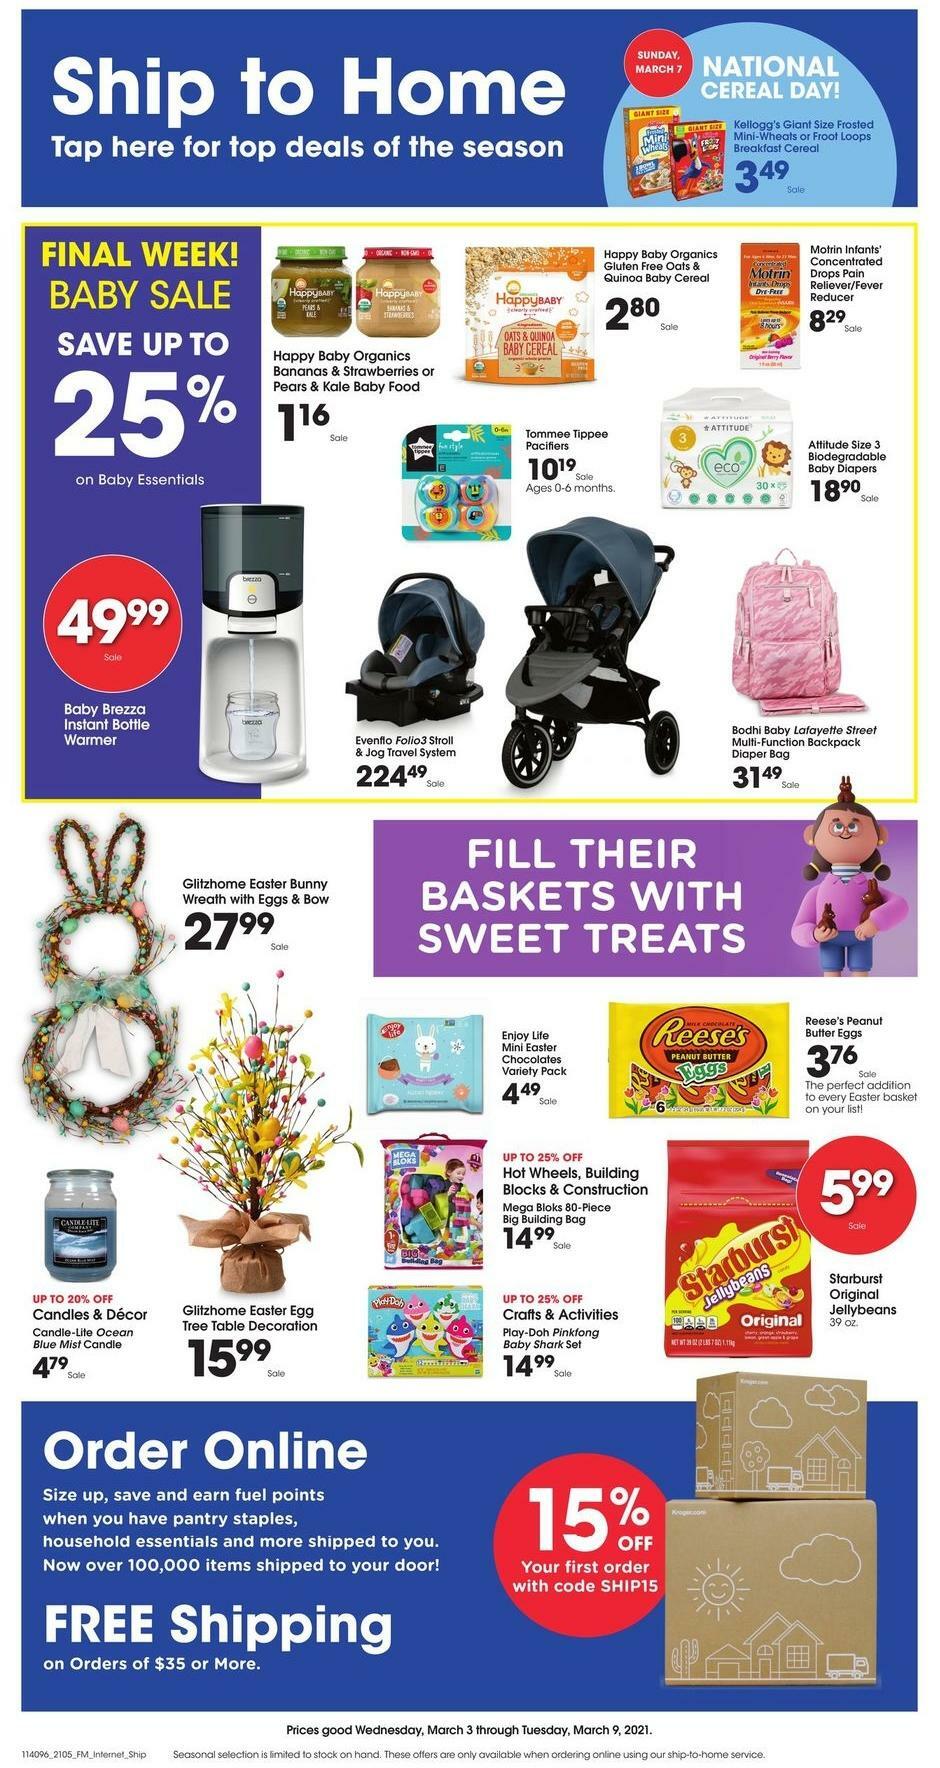 Kroger Ship to Home Weekly Ad from March 3